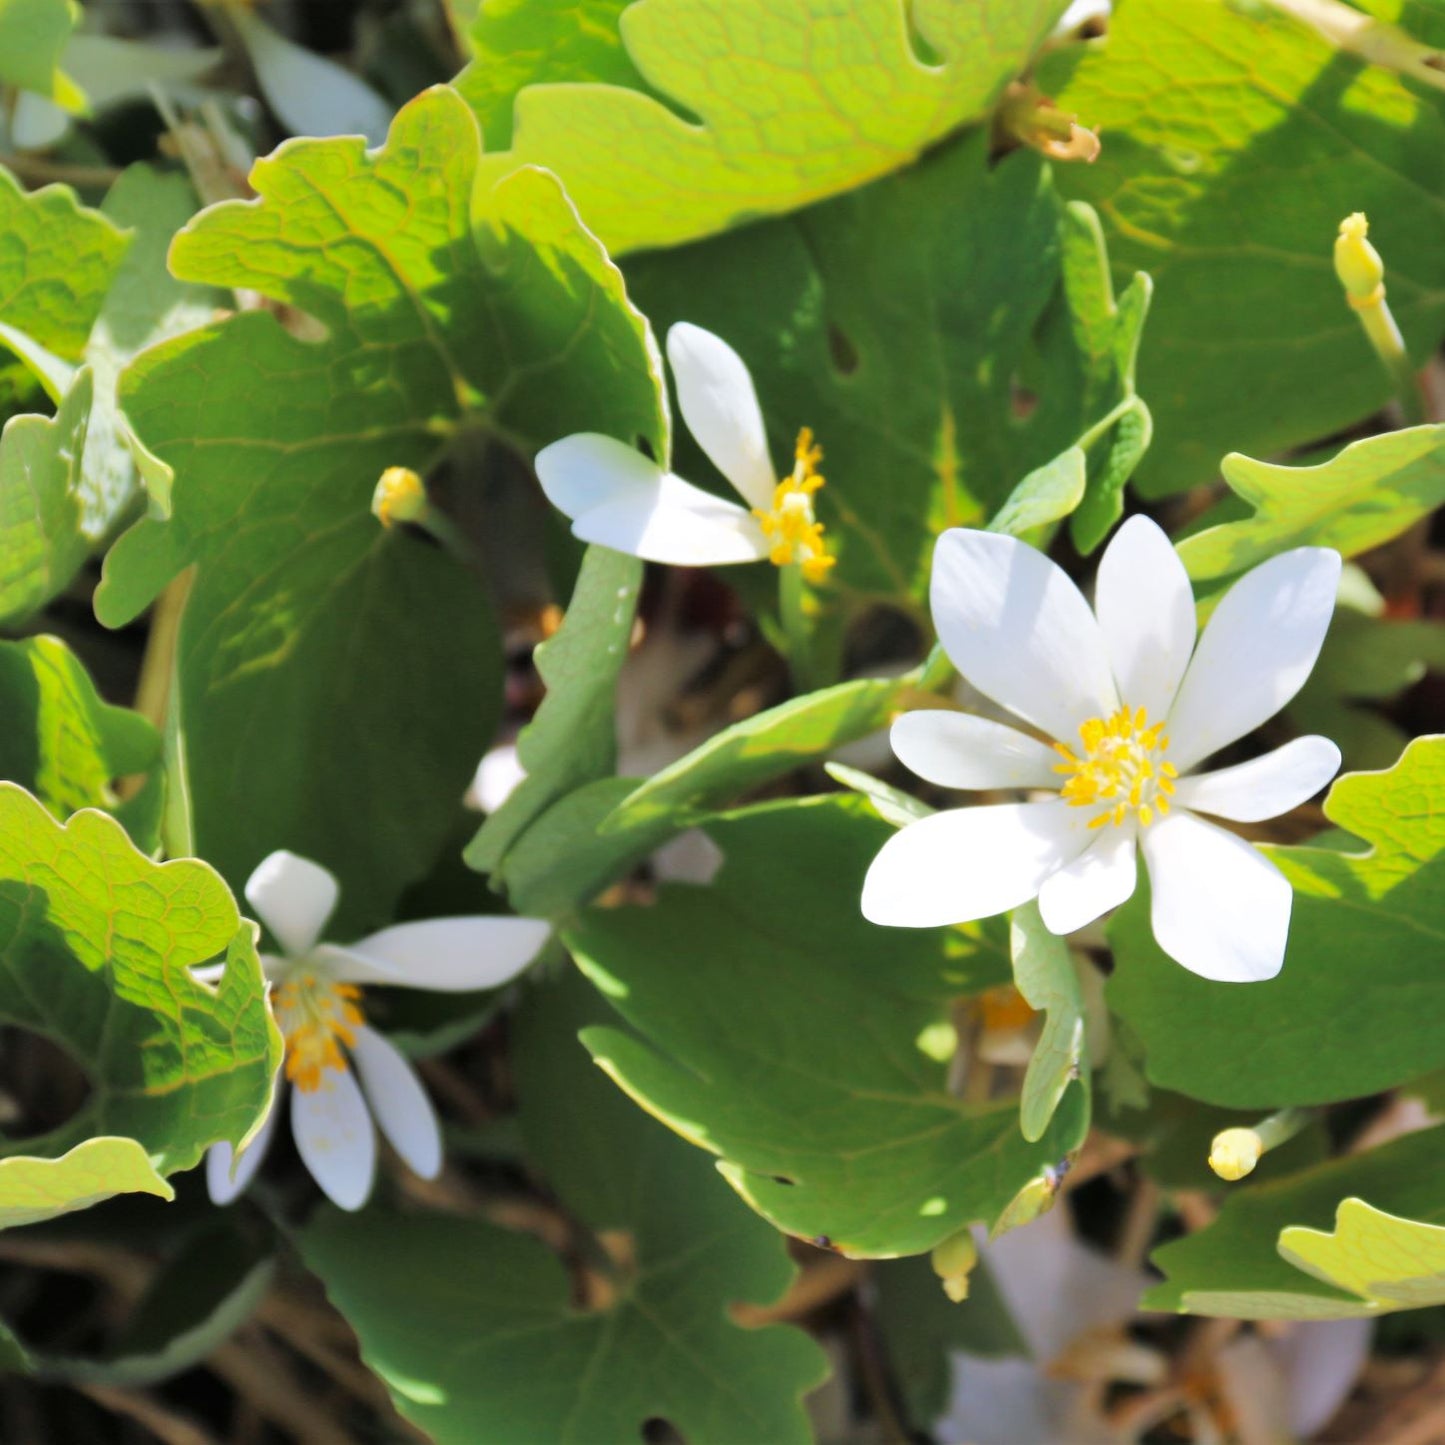 Shade house bloodroot in bloom